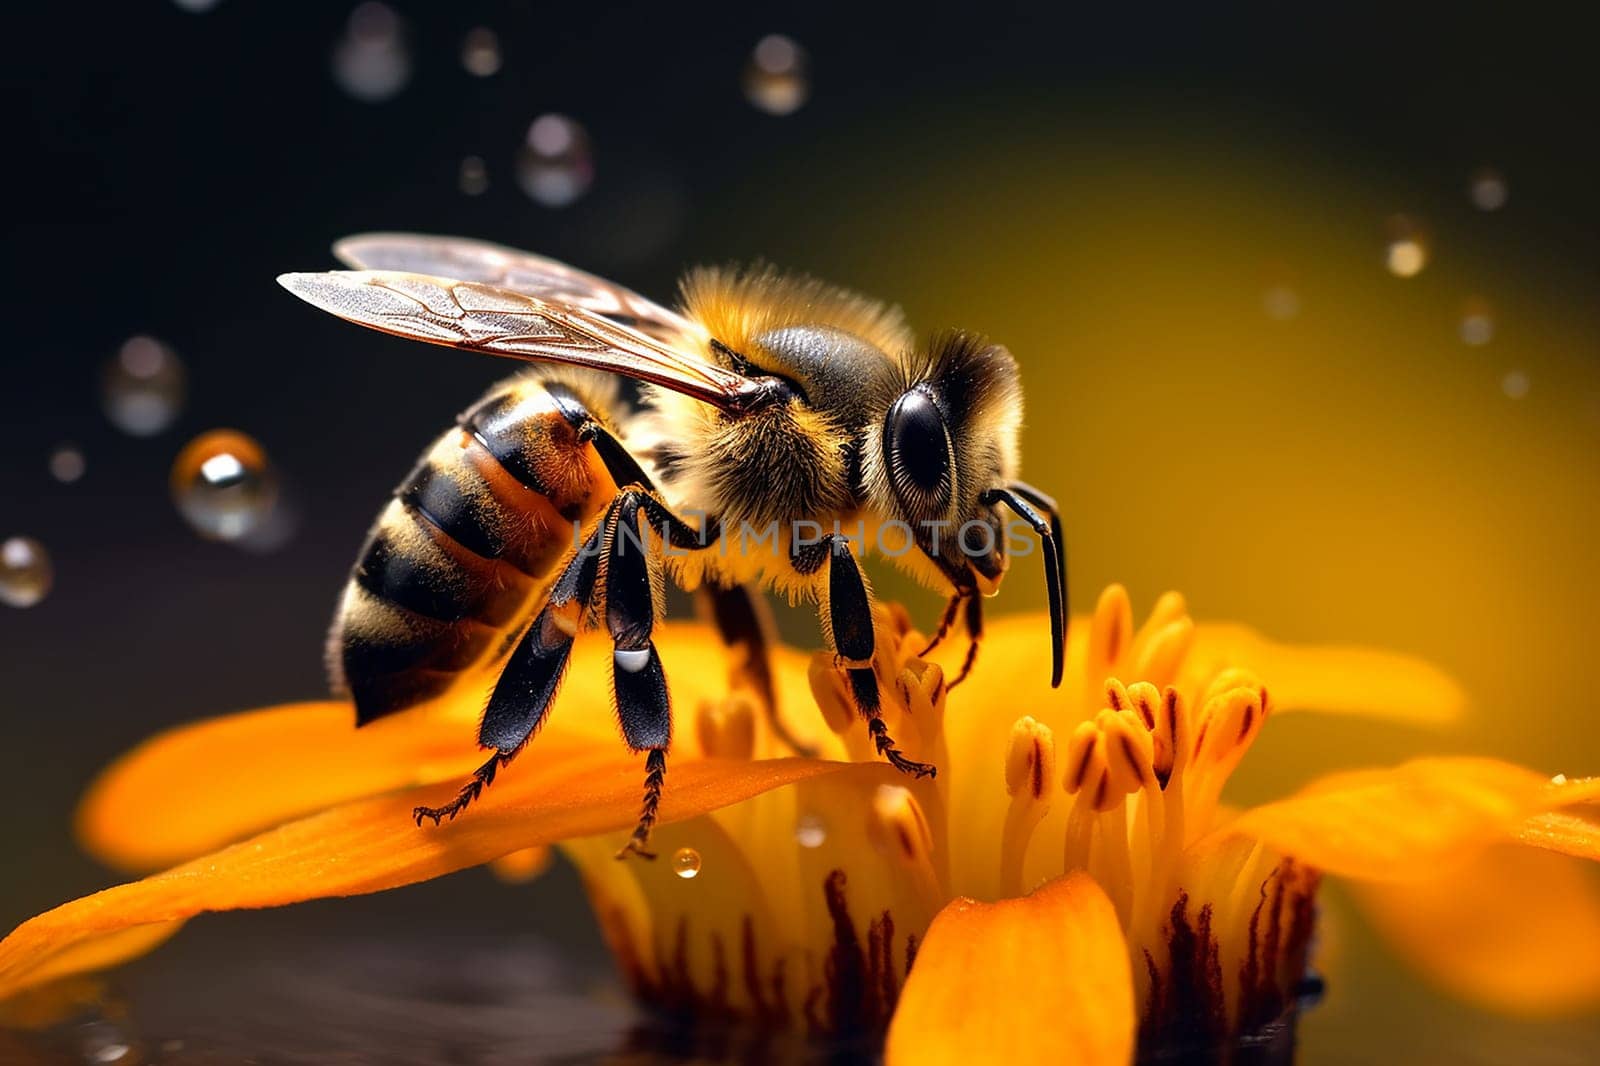 A bee in the process of pollinating a flower, sunlight, natural lighting by Hype2art